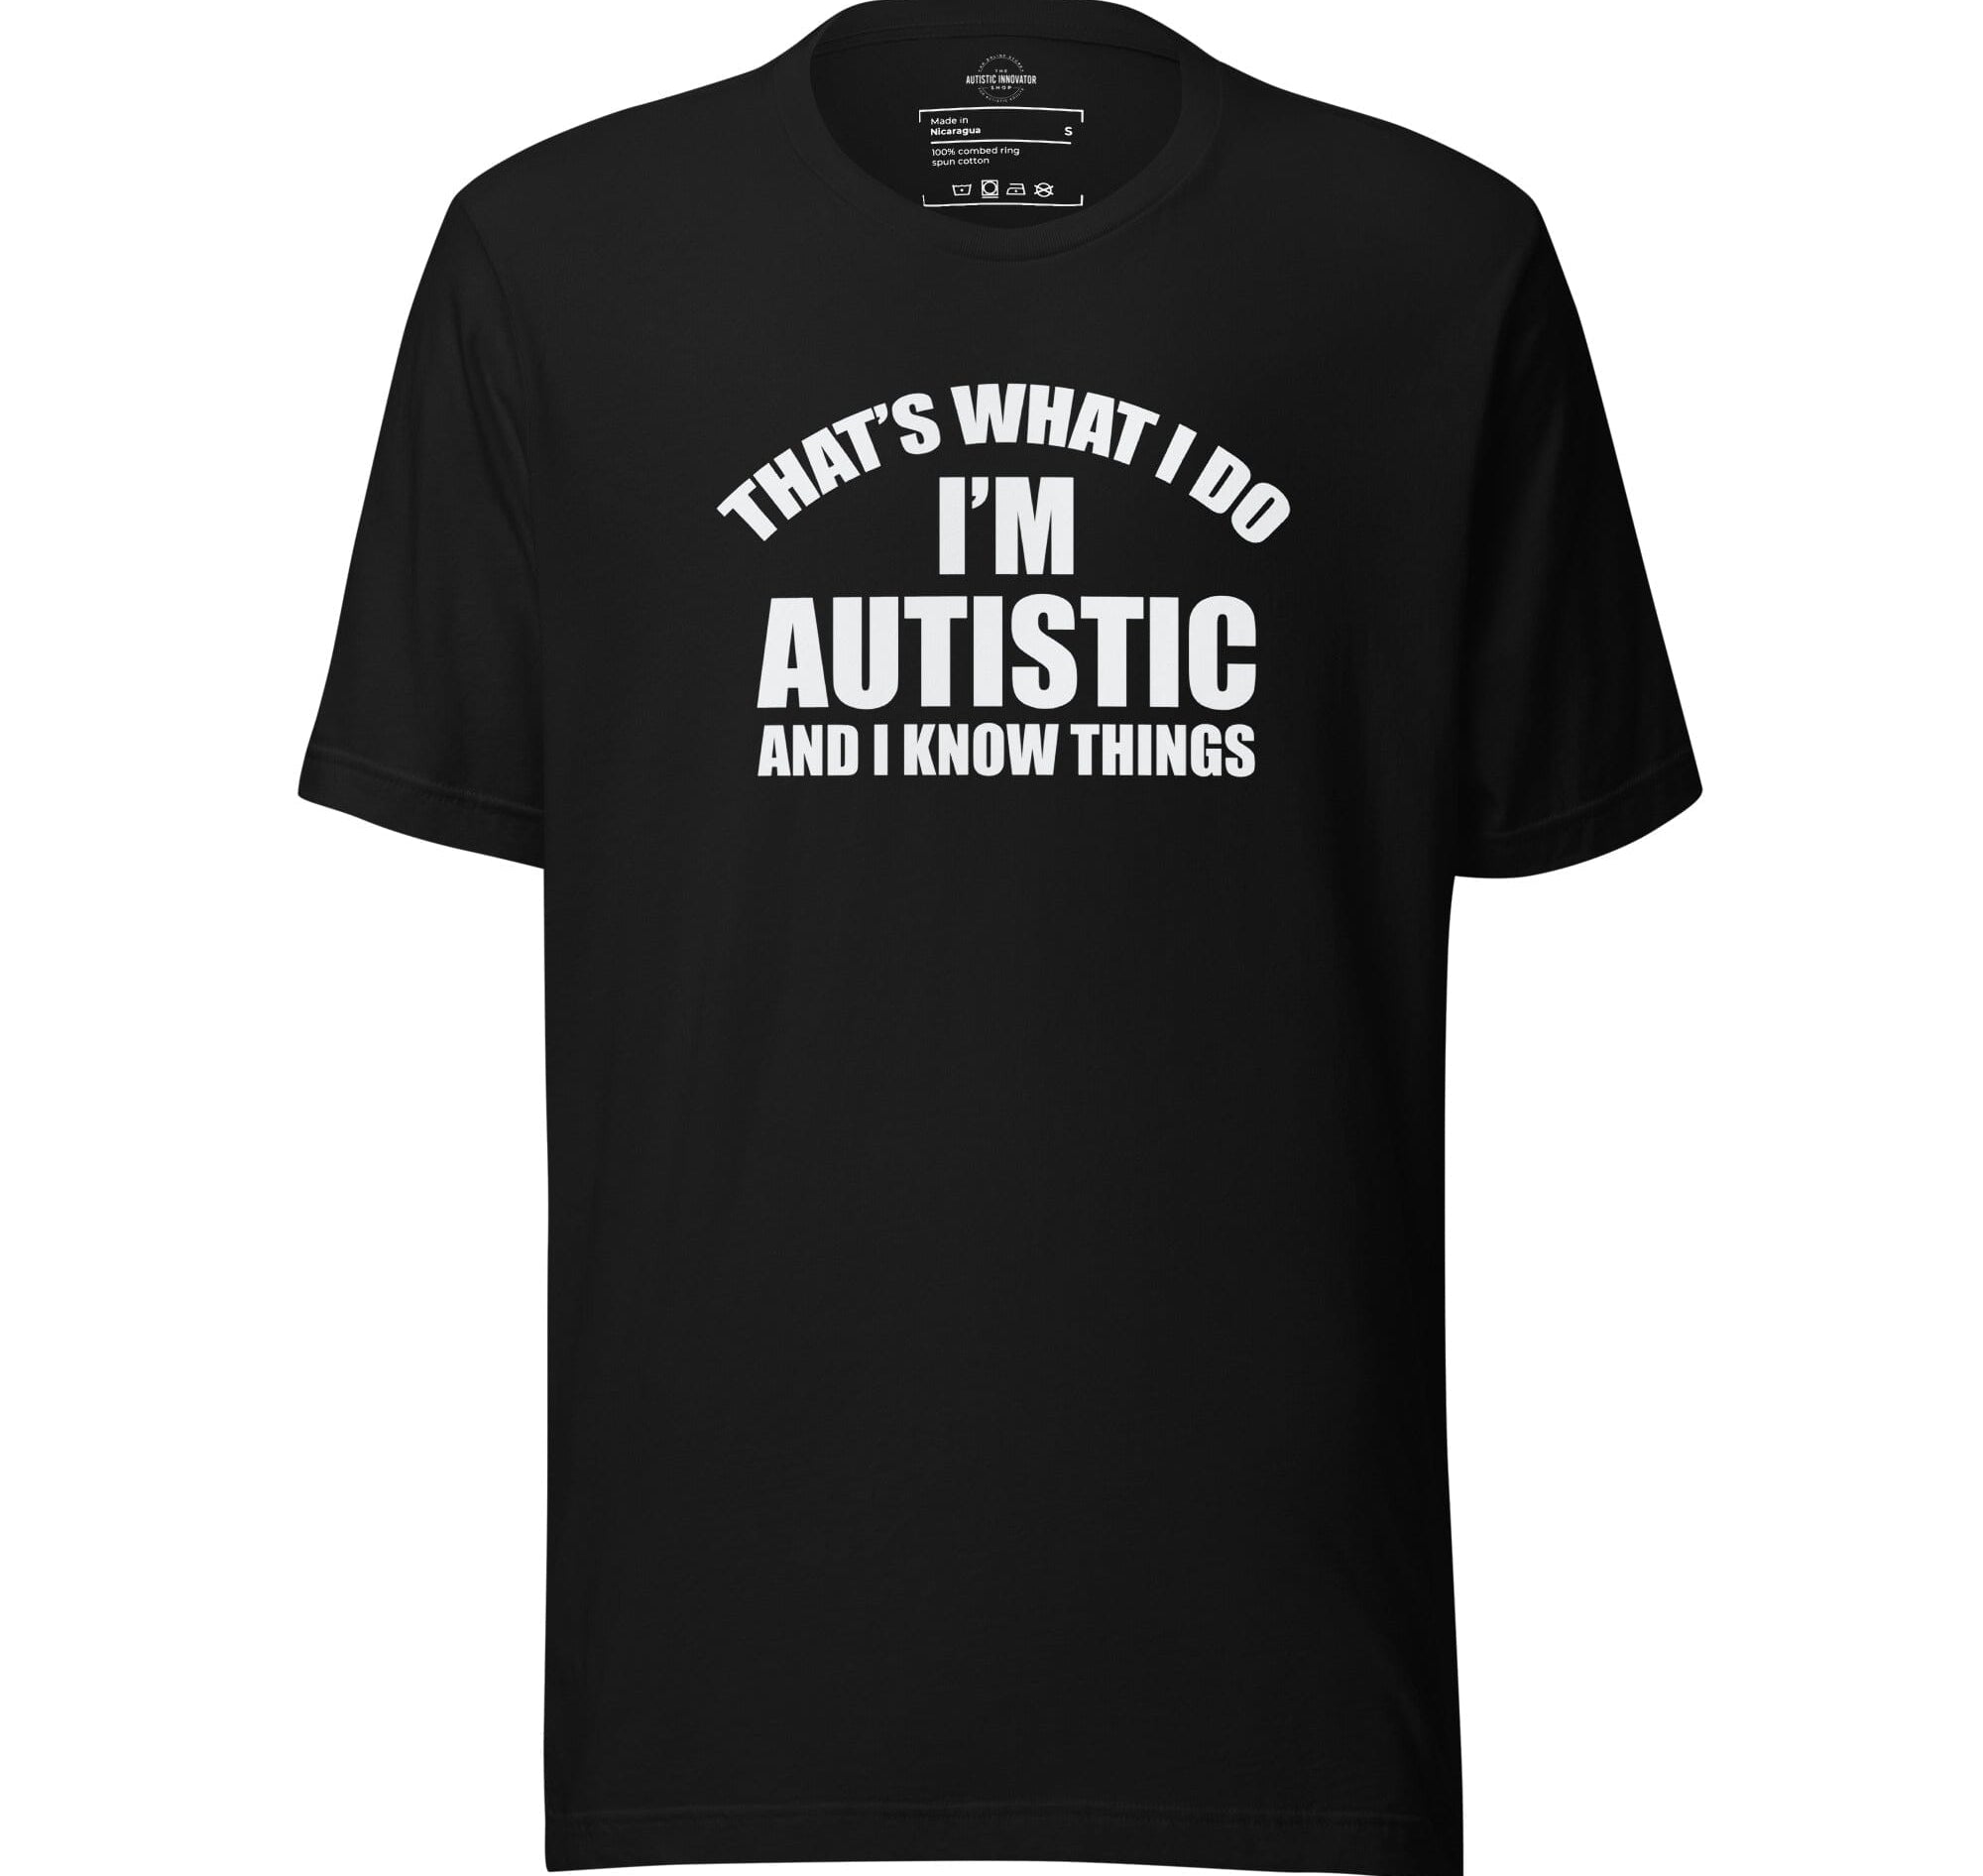 That's What I Do, I'm Autistic and I Know Things Unisex t-shirt The Autistic Innovator Black S 